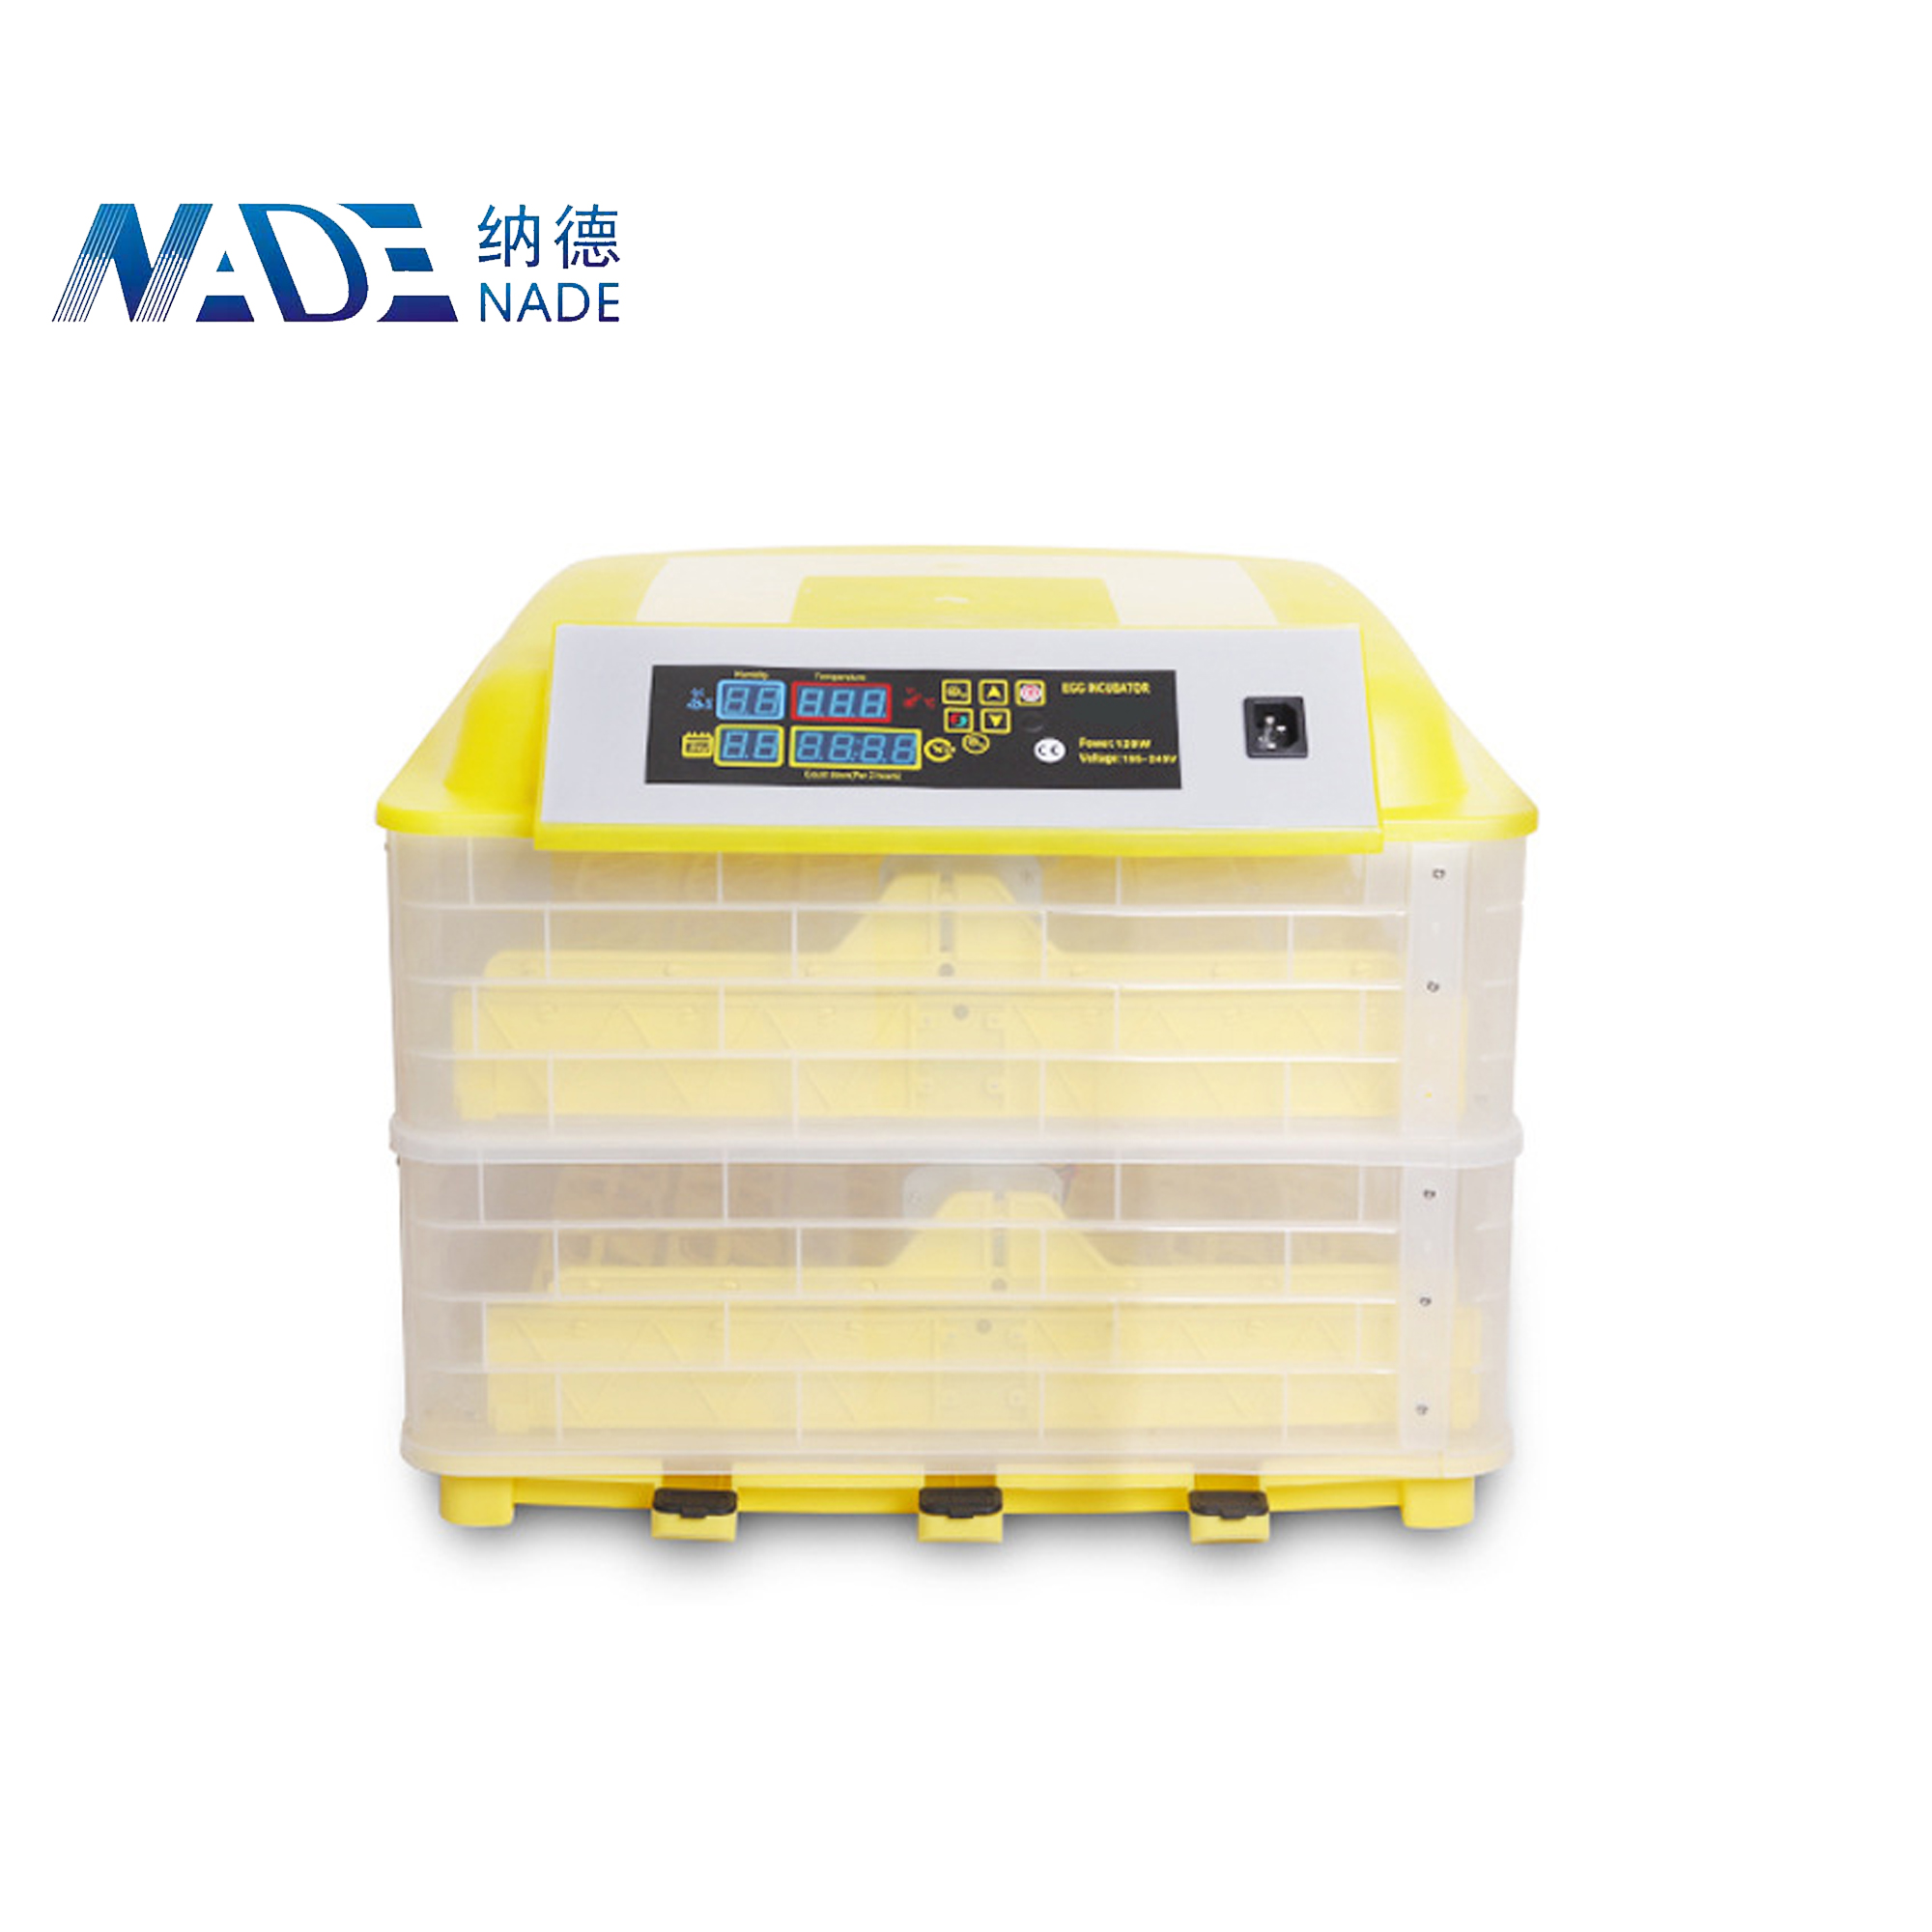 Nade YZ-112 Fully automatic intelligent household aquaculture equipment constant temperature incubator